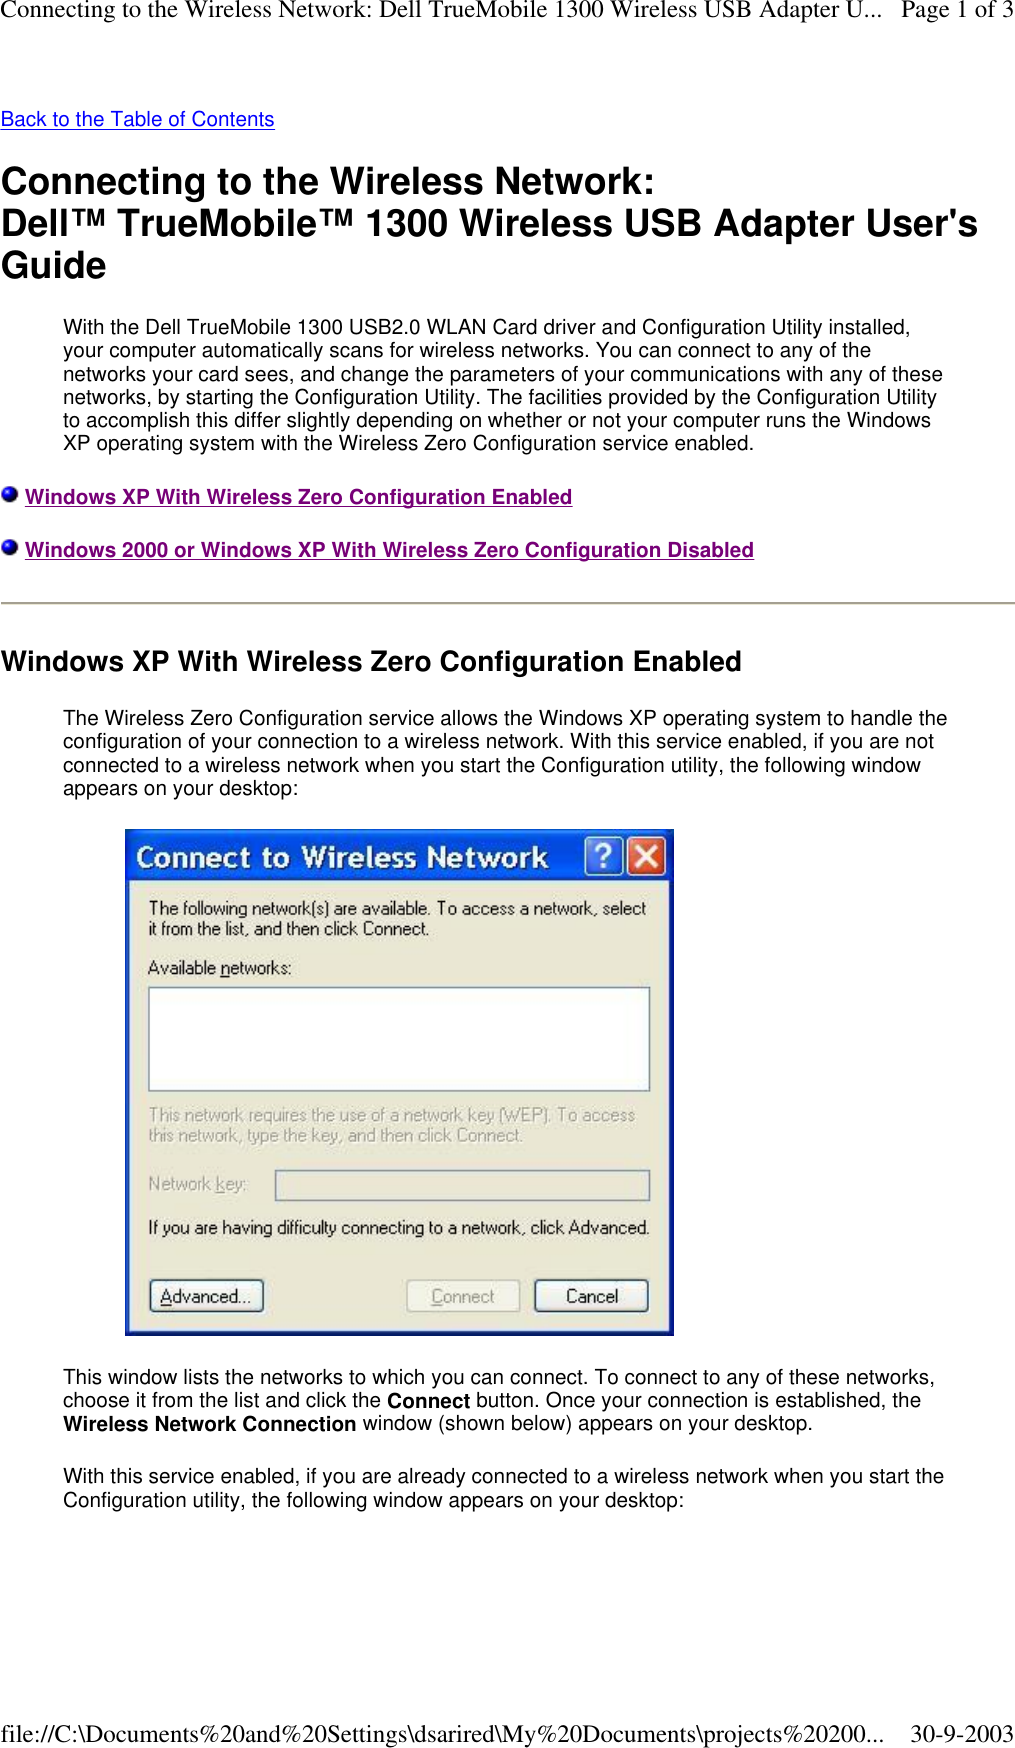 Back to the Table of Contents  Connecting to the Wireless Network: Dell™ TrueMobile™ 1300 Wireless USB Adapter User&apos;s Guide With the Dell TrueMobile 1300 USB2.0 WLAN Card driver and Configuration Utility installed, your computer automatically scans for wireless networks. You can connect to any of the networks your card sees, and change the parameters of your communications with any of these networks, by starting the Configuration Utility. The facilities provided by the Configuration Utility to accomplish this differ slightly depending on whether or not your computer runs the Windows XP operating system with the Wireless Zero Configuration service enabled.  Windows XP With Wireless Zero Configuration Enabled  Windows 2000 or Windows XP With Wireless Zero Configuration Disabled Windows XP With Wireless Zero Configuration Enabled The Wireless Zero Configuration service allows the Windows XP operating system to handle the configuration of your connection to a wireless network. With this service enabled, if you are not connected to a wireless network when you start the Configuration utility, the following window appears on your desktop:  This window lists the networks to which you can connect. To connect to any of these networks, choose it from the list and click the Connect button. Once your connection is established, the Wireless Network Connection window (shown below) appears on your desktop. With this service enabled, if you are already connected to a wireless network when you start the Configuration utility, the following window appears on your desktop: Page 1 of 3Connecting to the Wireless Network: Dell TrueMobile 1300 Wireless USB Adapter U...30-9-2003file://C:\Documents%20and%20Settings\dsarired\My%20Documents\projects%20200...